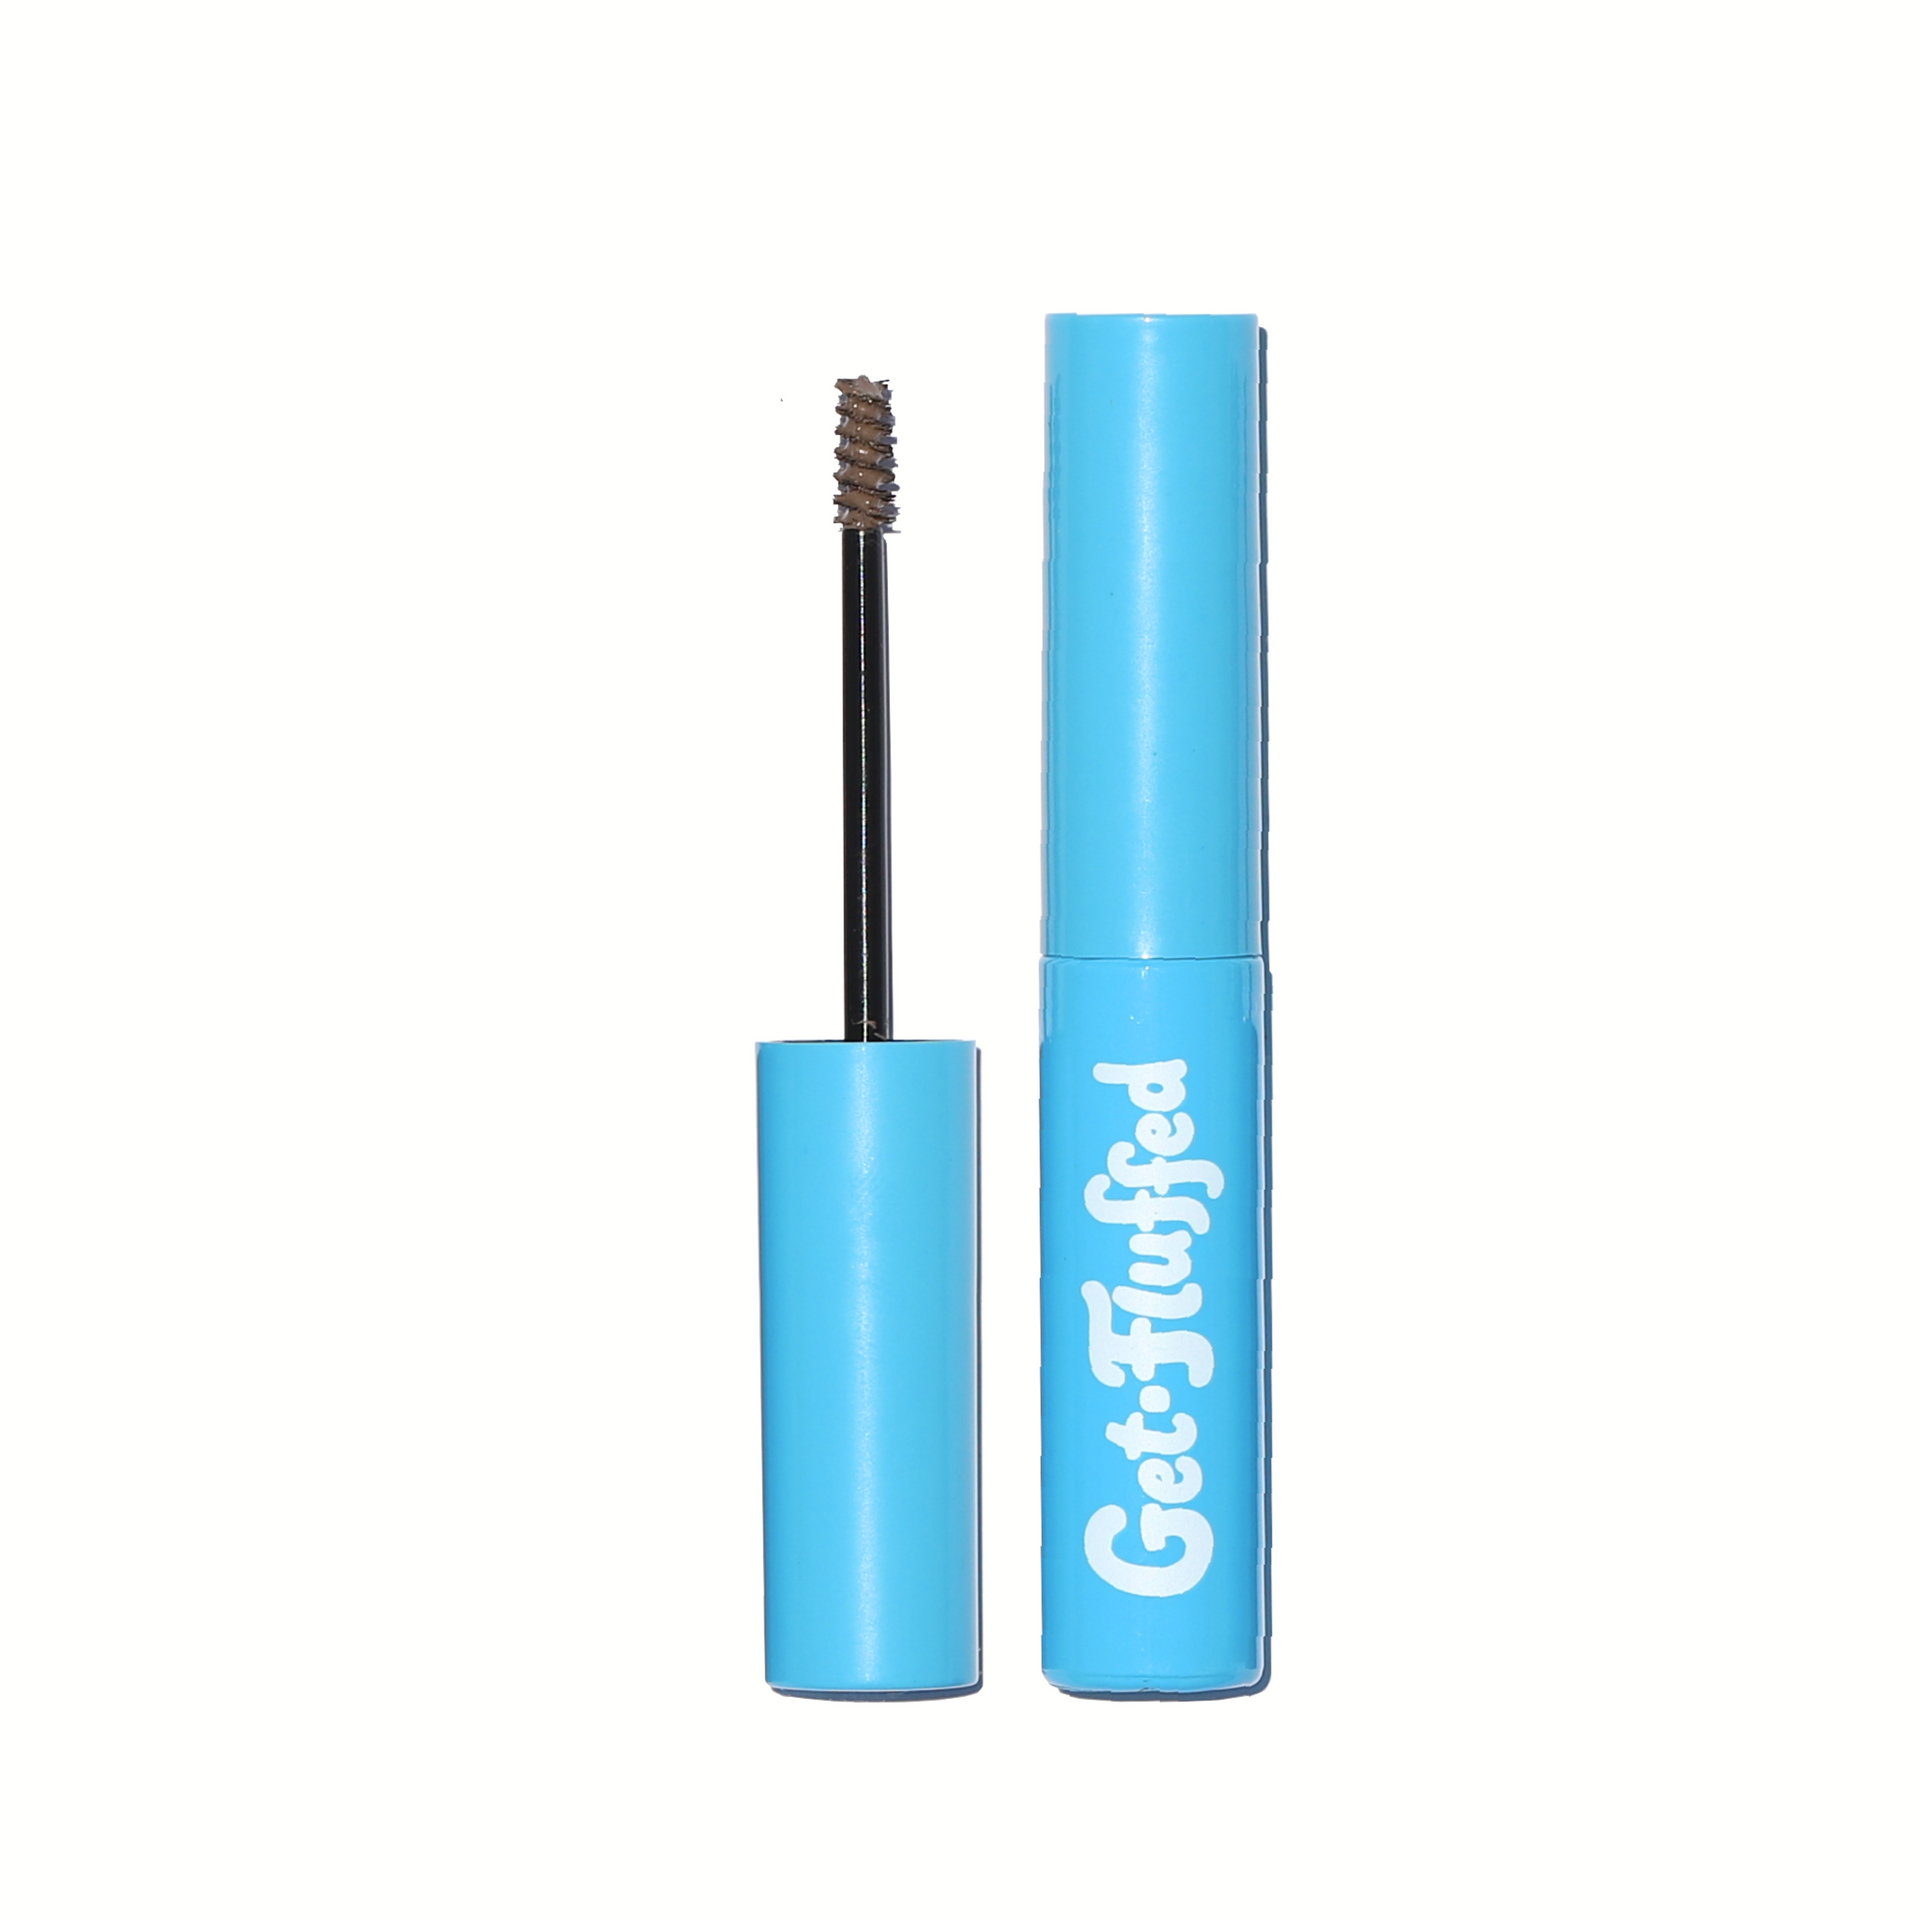 A blue tube of "Get-Fluffed Brow Gel" with the cap off, showing the mini spoolie brush applicator.